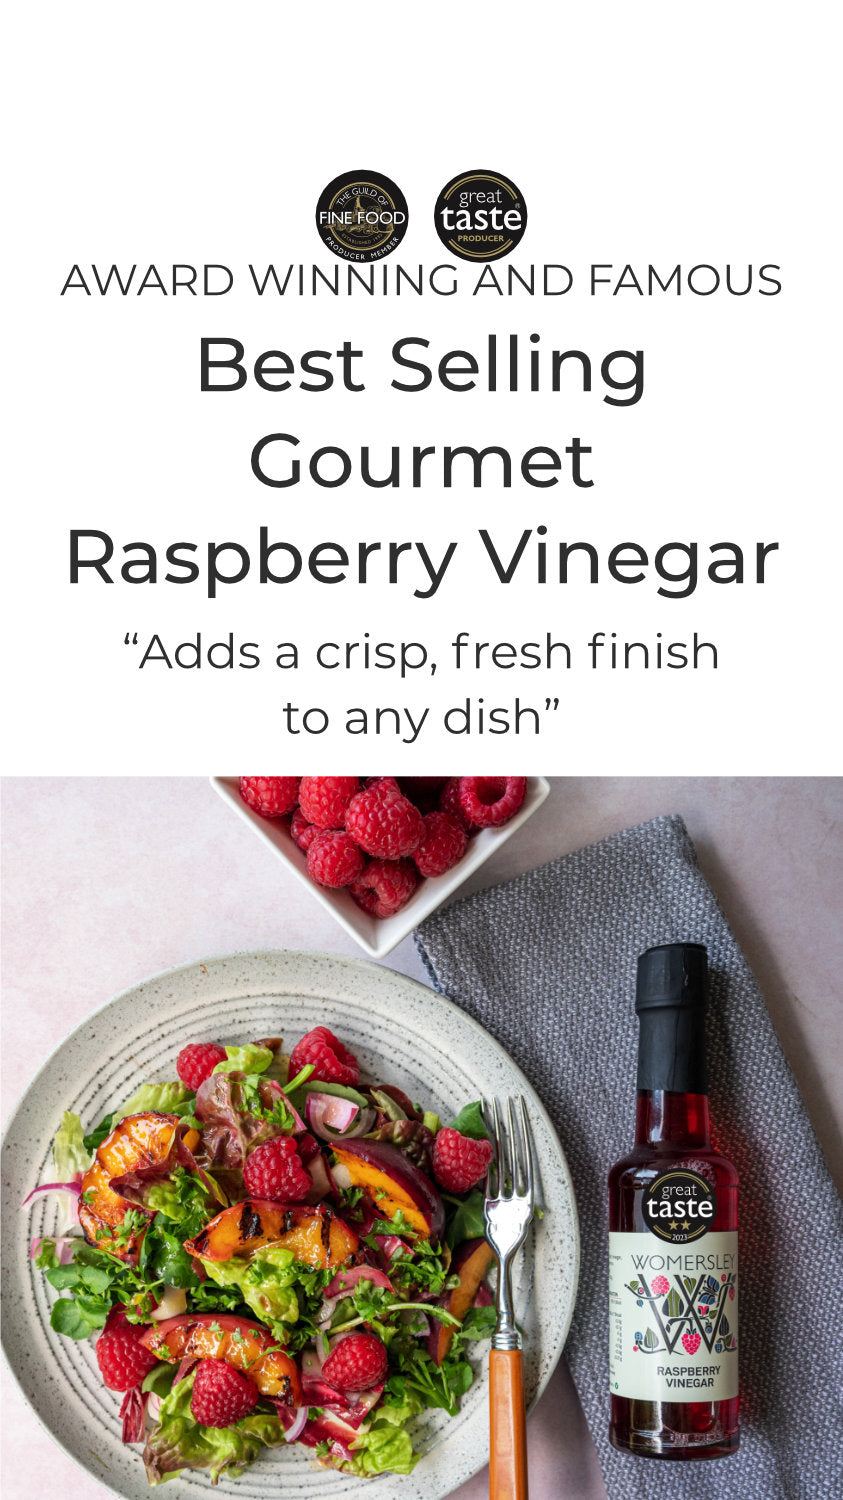 Award winning and famous best-selling Gourmet Raspberry Vinegar. Adds a crisp, fresh finish to any dish”.